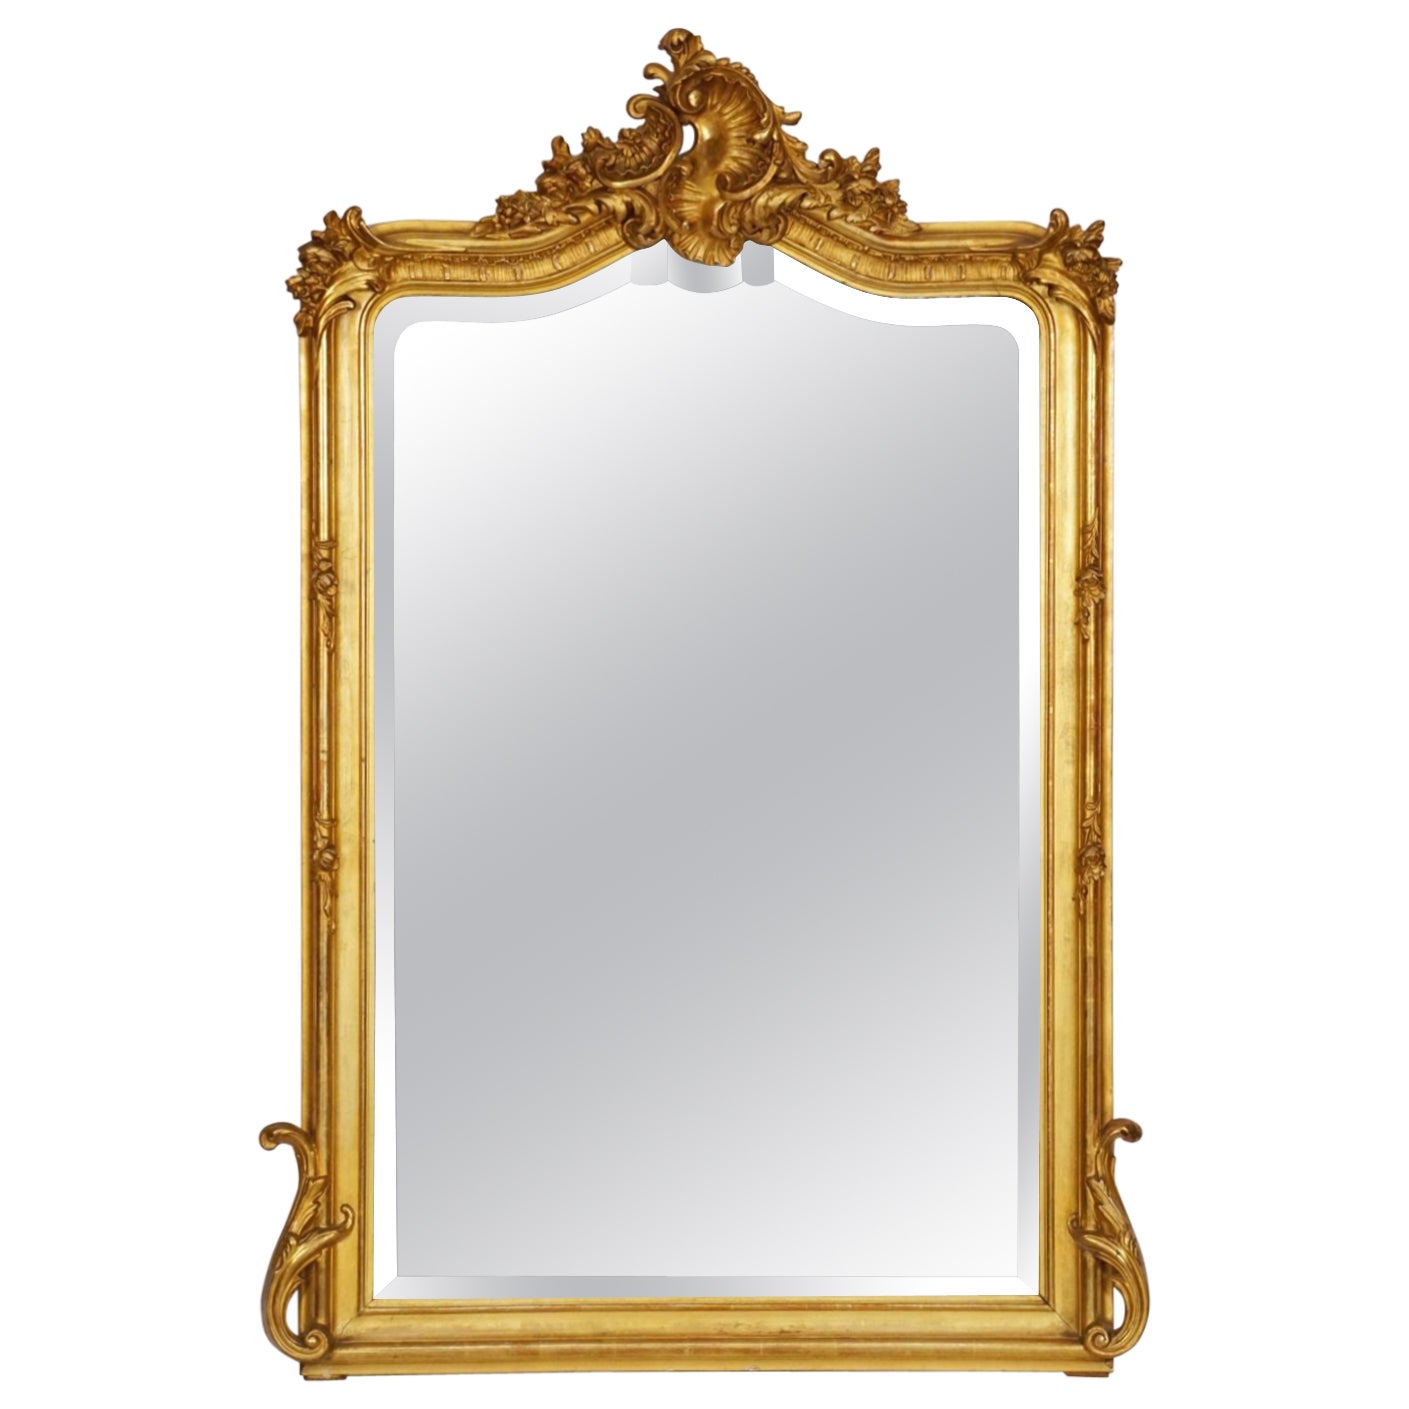 Large French Gilt Pier Mirror from the 19th Century (H 56 x W 37) For Sale